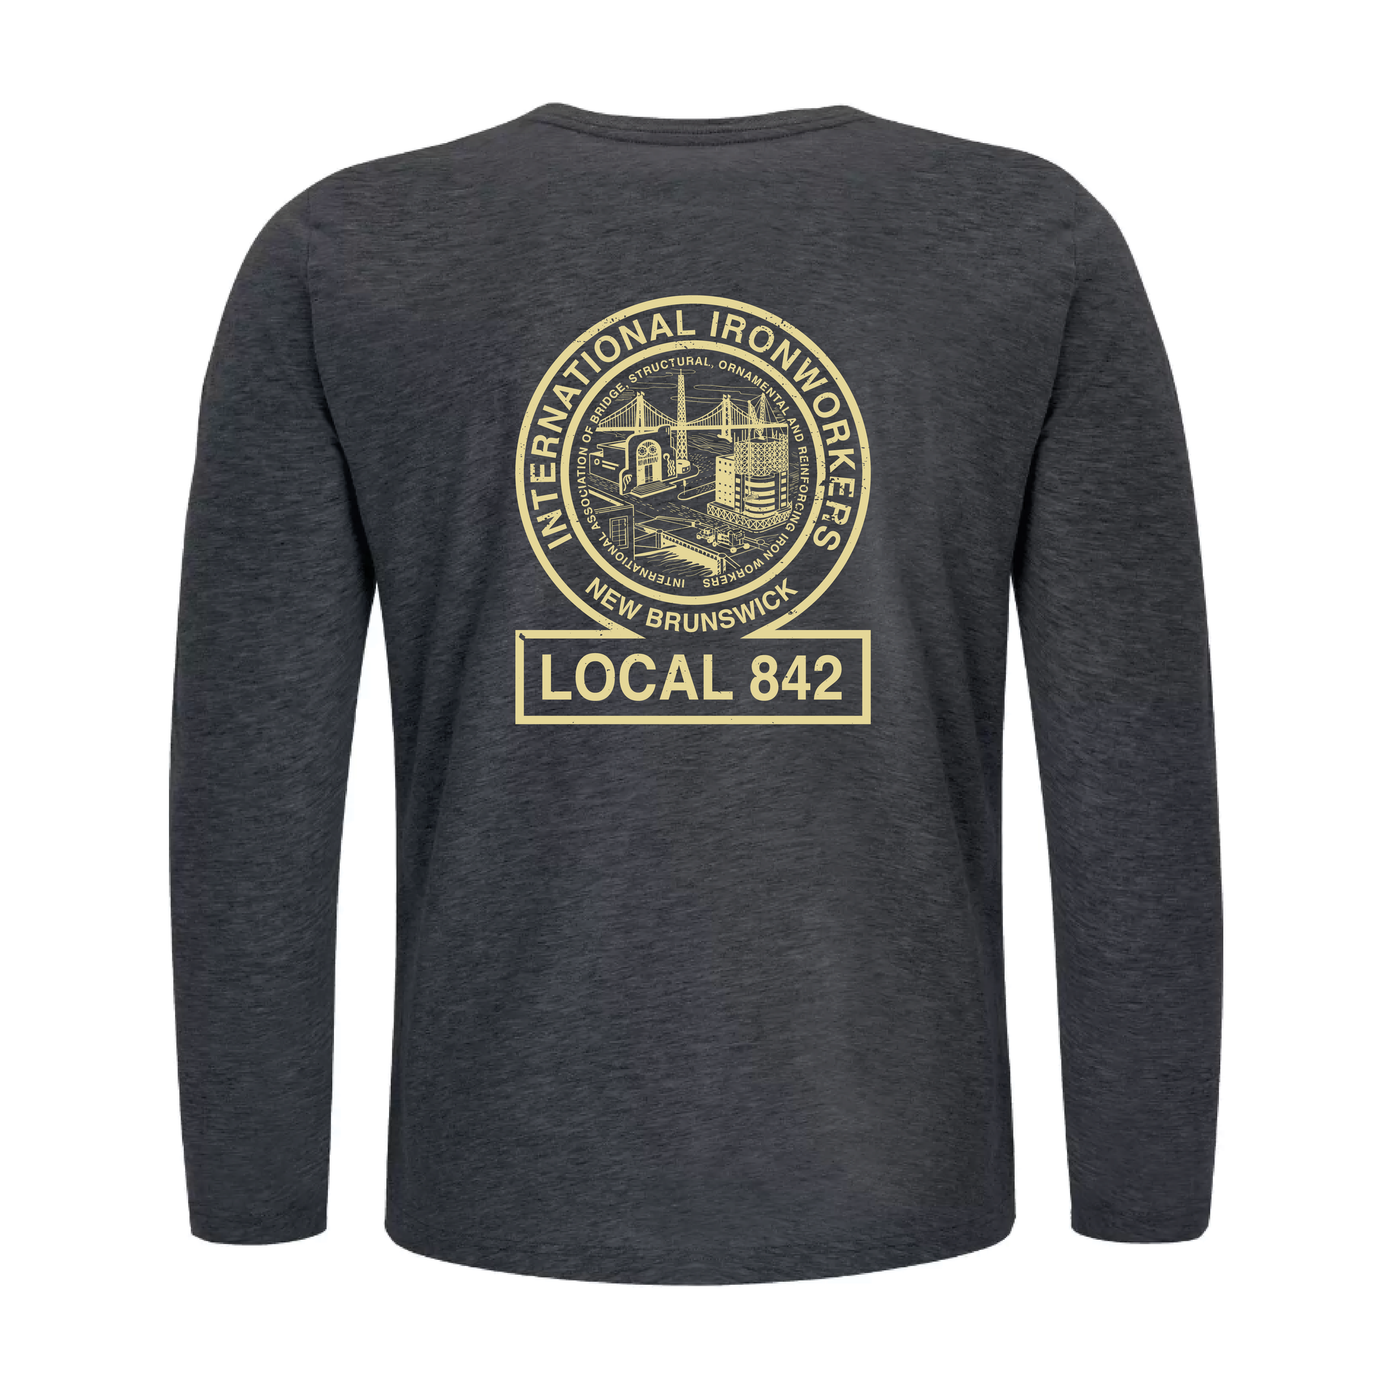 Ironworkers Local 842 Long Sleeve T-Shirt (Charcoal)